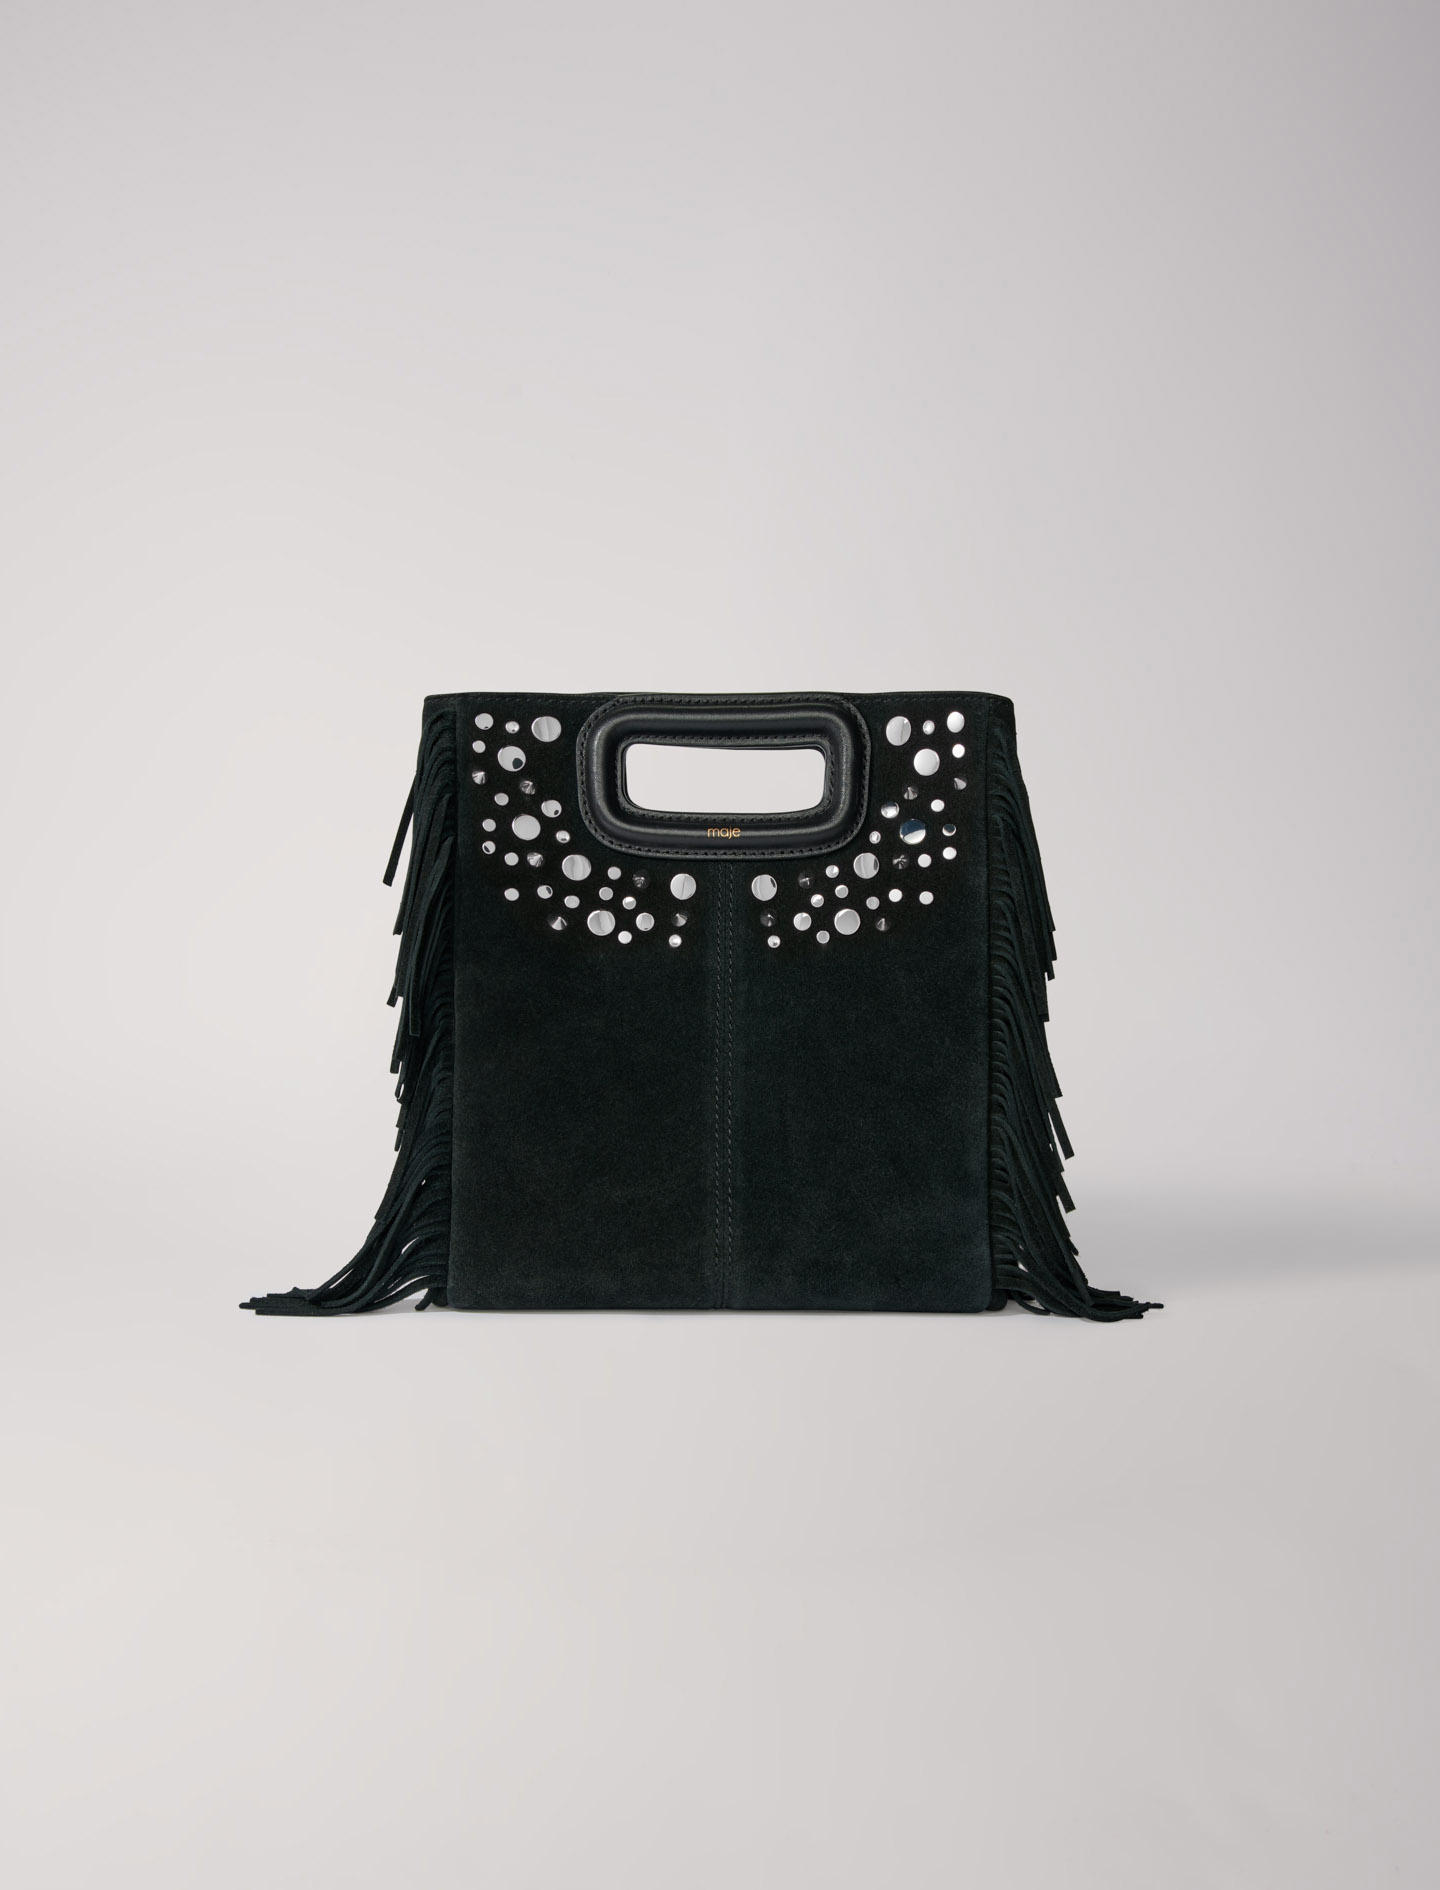 Mixte's cotton Leather: Fringed leather M bag for Fall/Winter, size Mixte-All Bags-OS (ONE SIZE), in color Black / Black